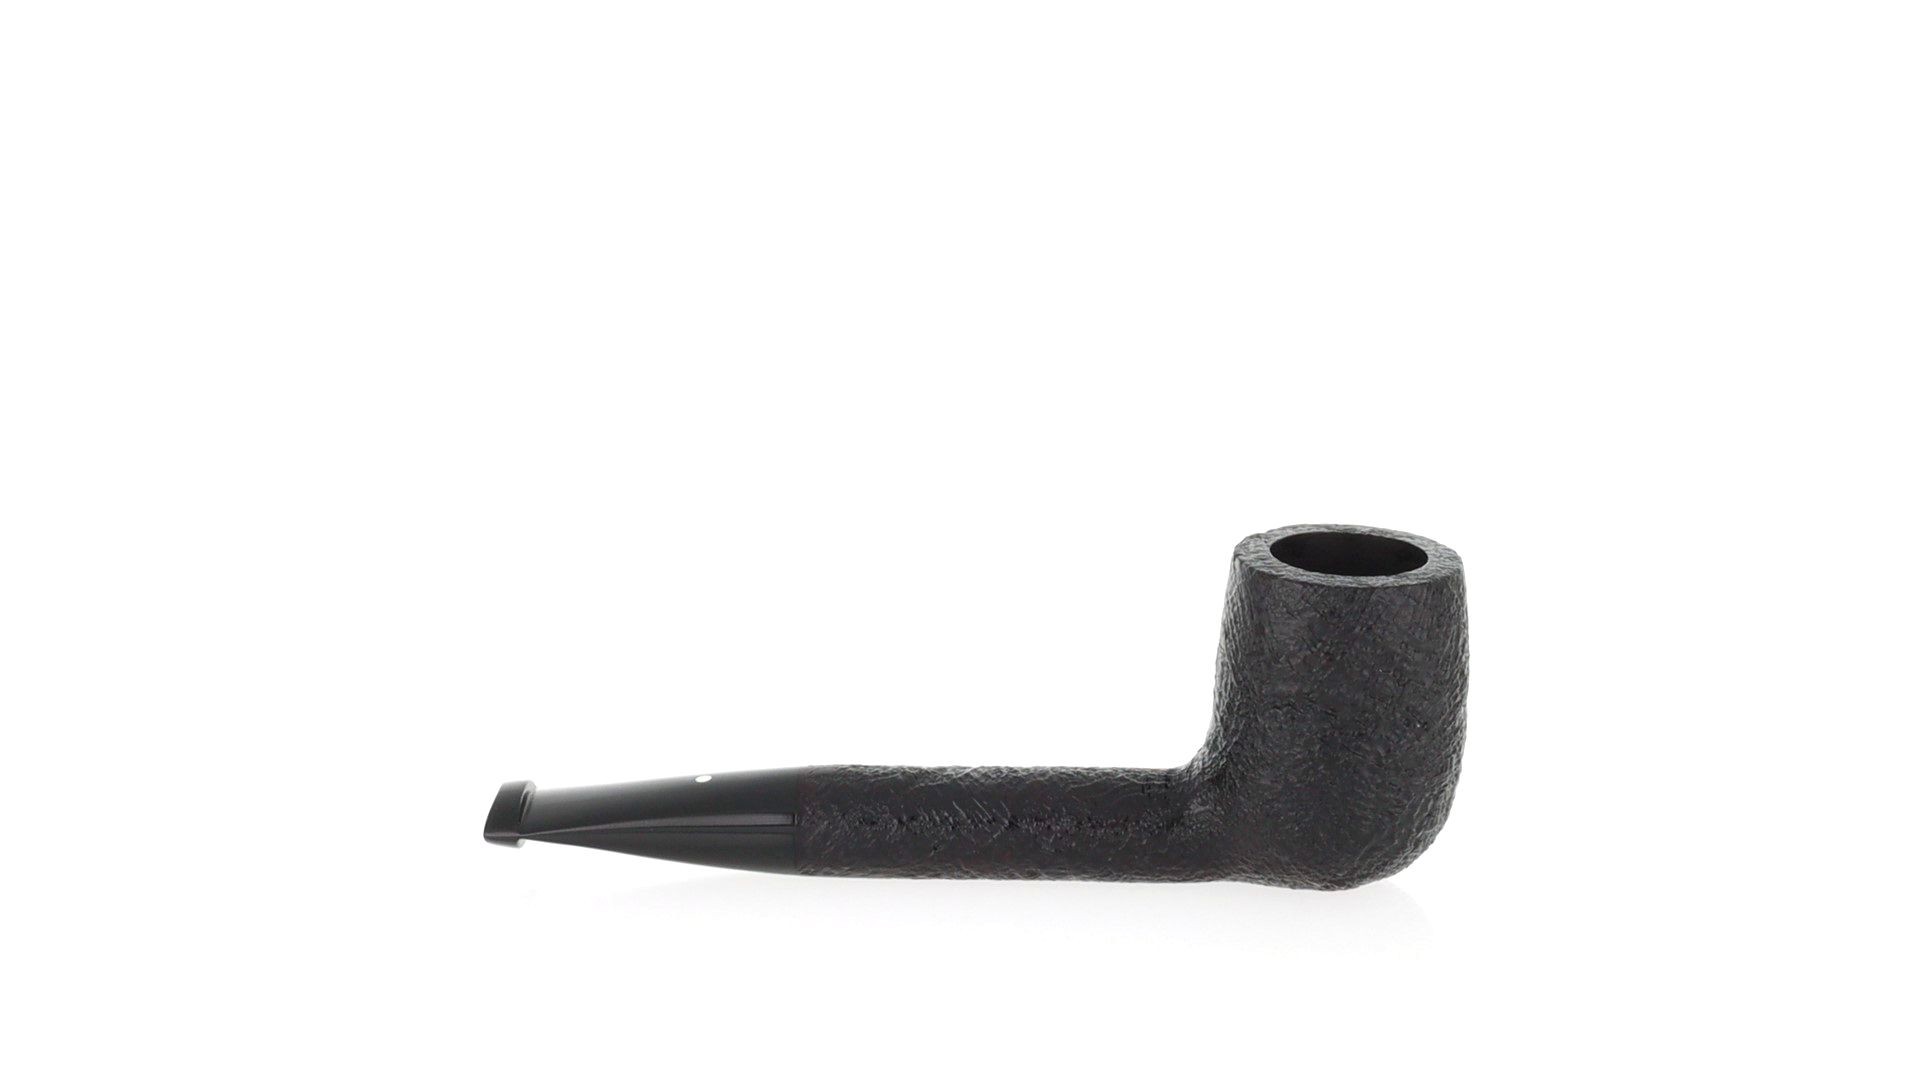 Dunhill Shell Briar Group 3 Form Liverpool Pfeife